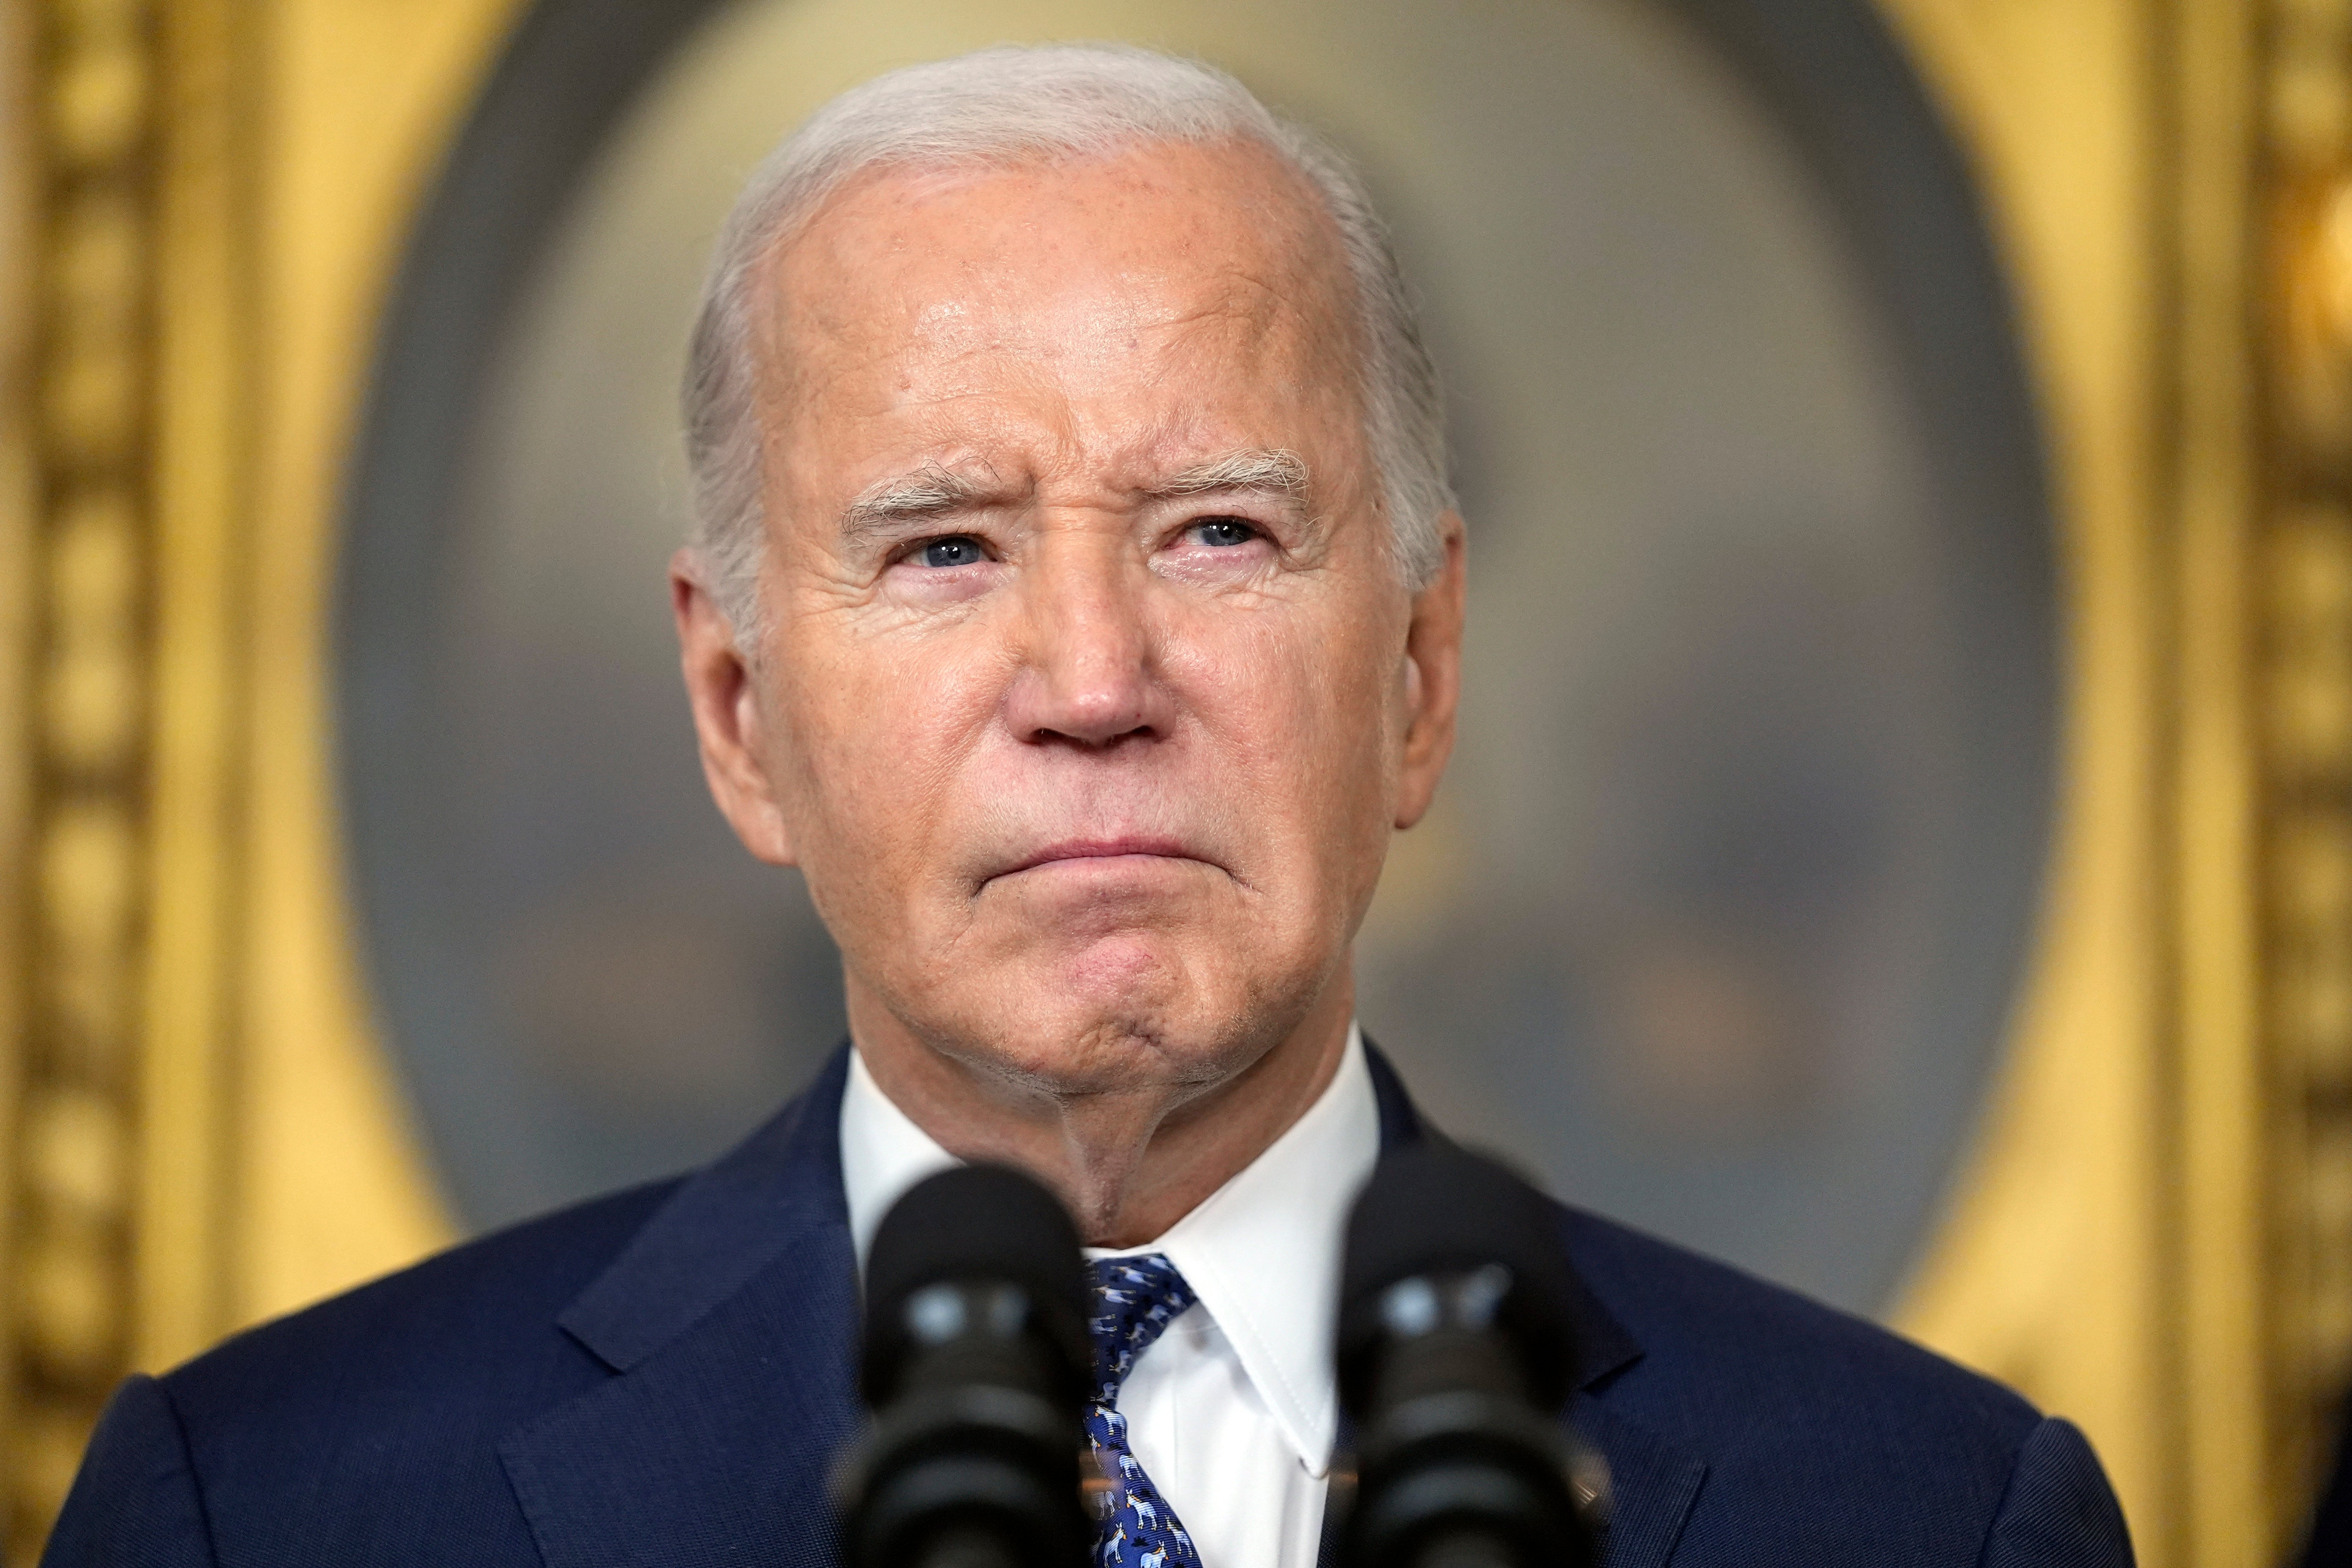 Democrats are seeking to defend president Biden after he appeared to confuse Mexico with Egyptduring a press conference